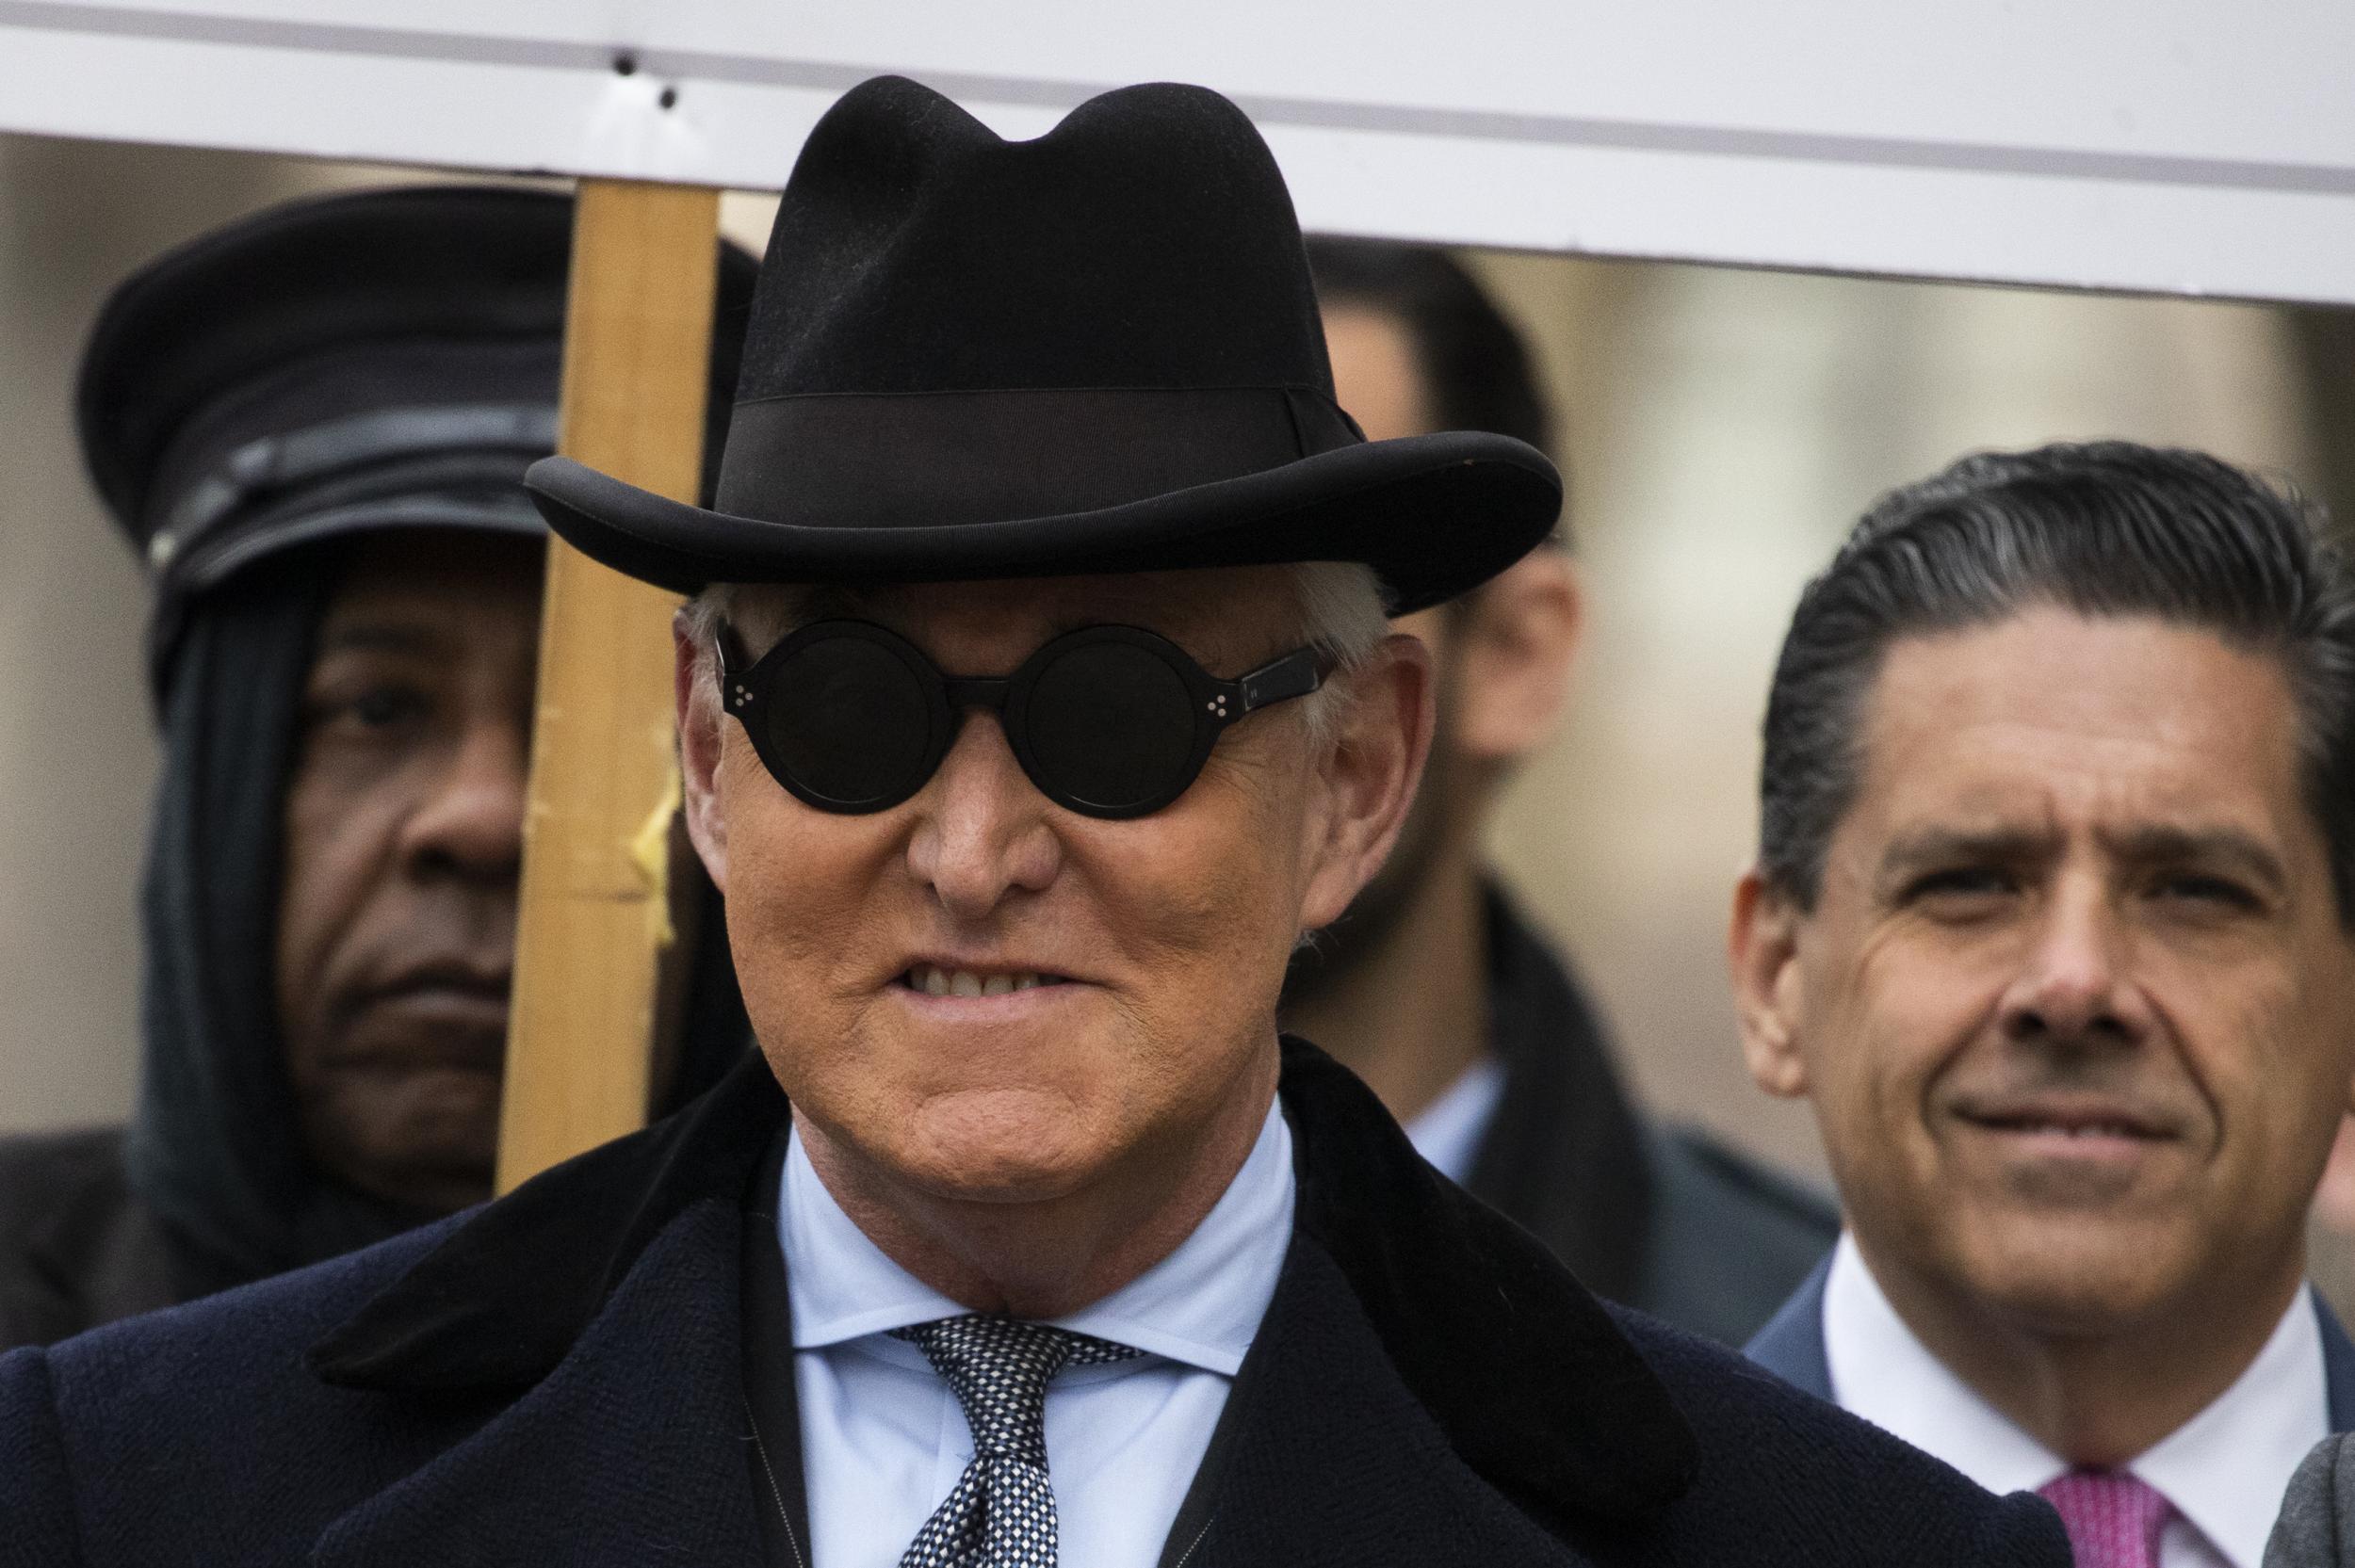 Roger Stone, a staunch ally of President Trump, arrives at federal court in Washington, DC, on Thursday for sentencing on his convictions for witness tampering and lying to Congress